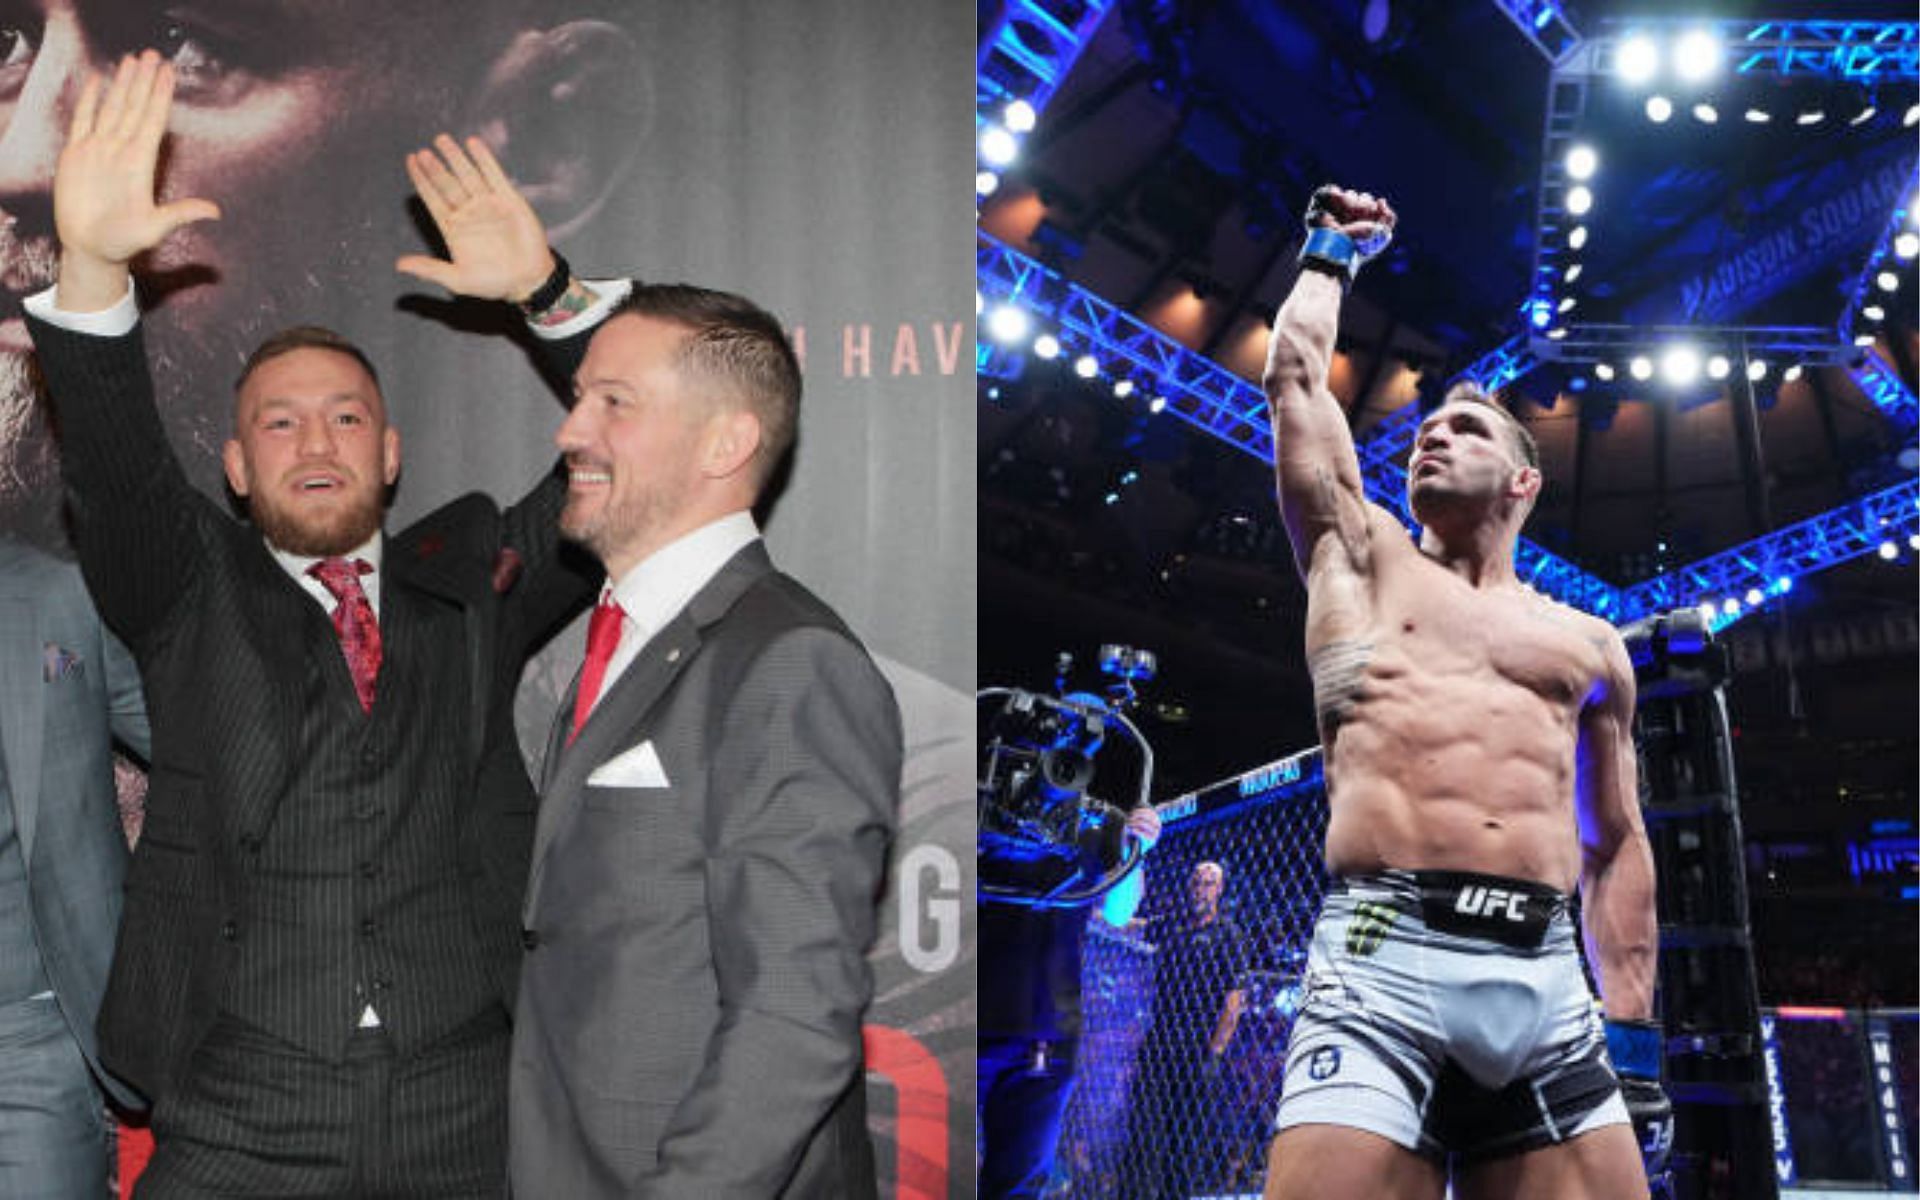 Conor McGregor and John Kavanagh (left) [image courtesy of Phillip Massey/Getty Images]; Michael Chandler (right) [image courtesy of Chris Unger/Zuffa LLC via Getty Images]